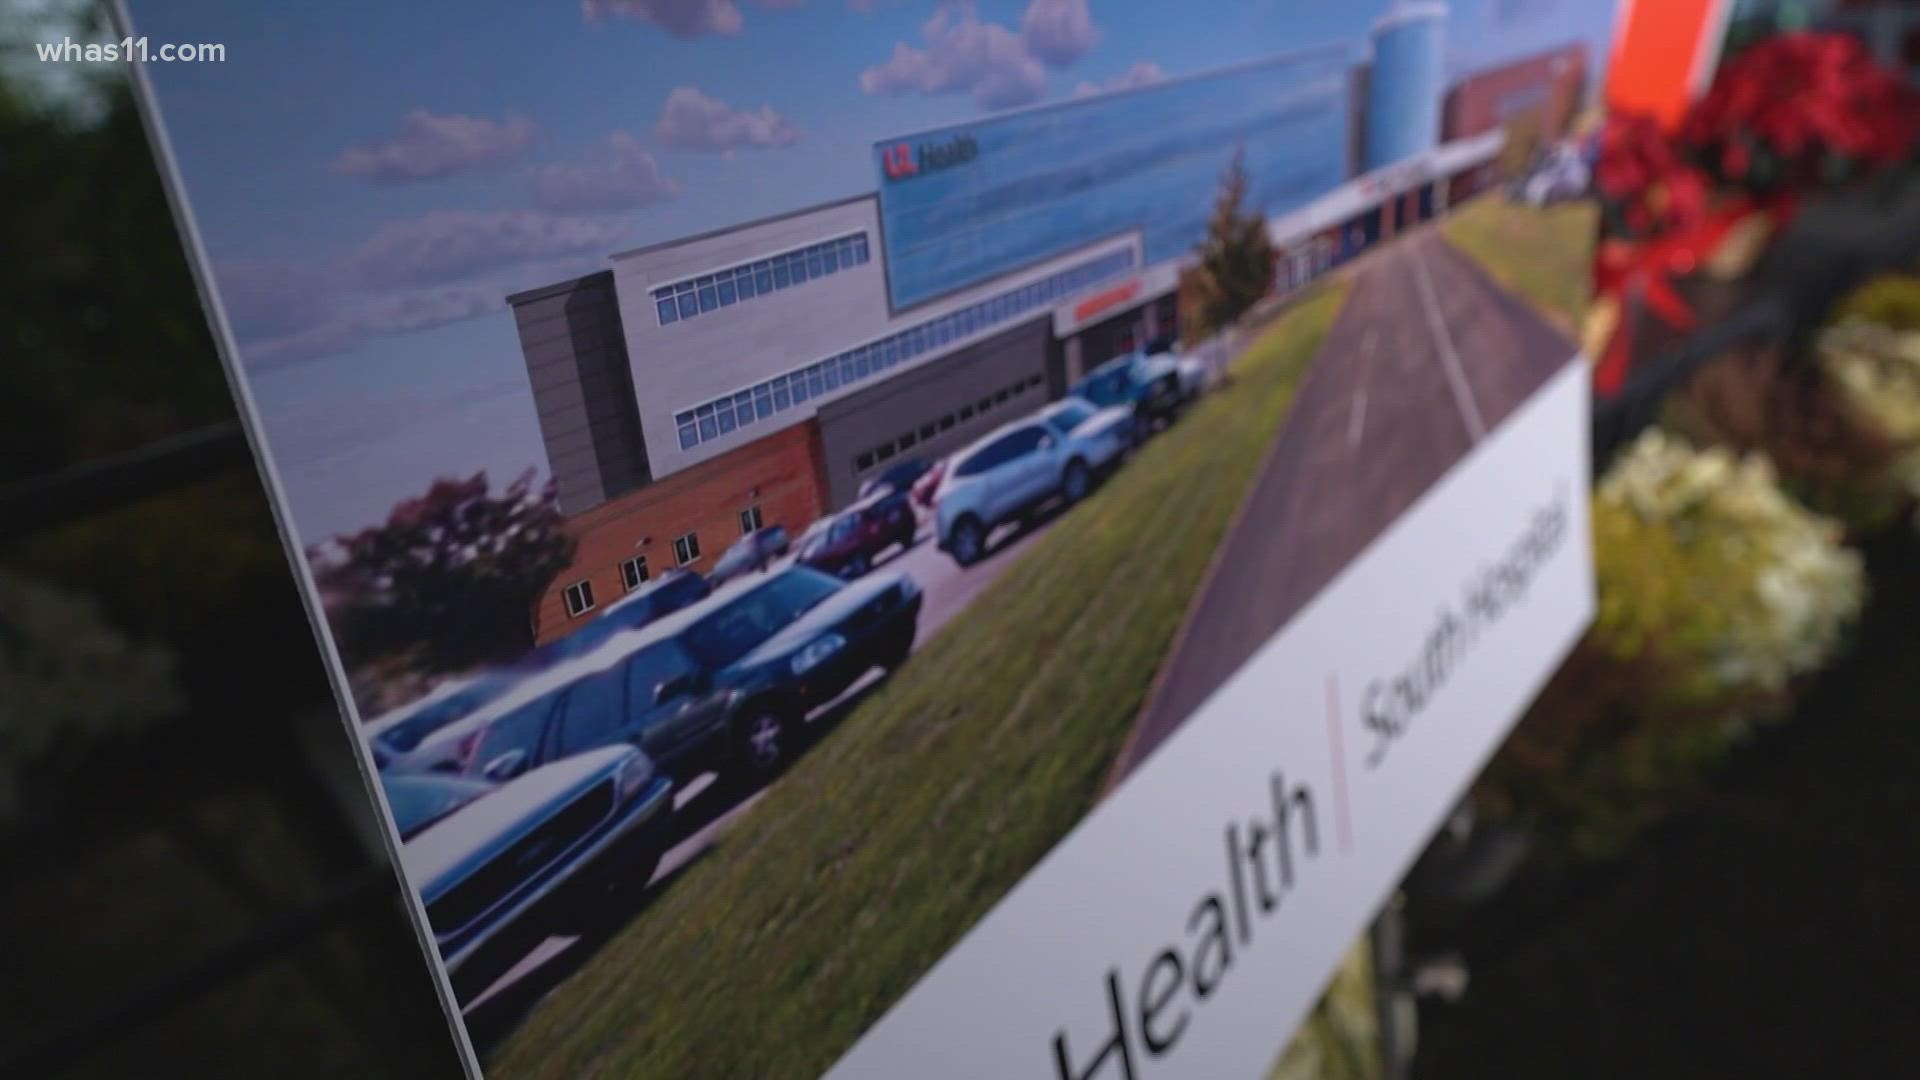 The current medical center will be renamed UofL Health -- South Hospital.